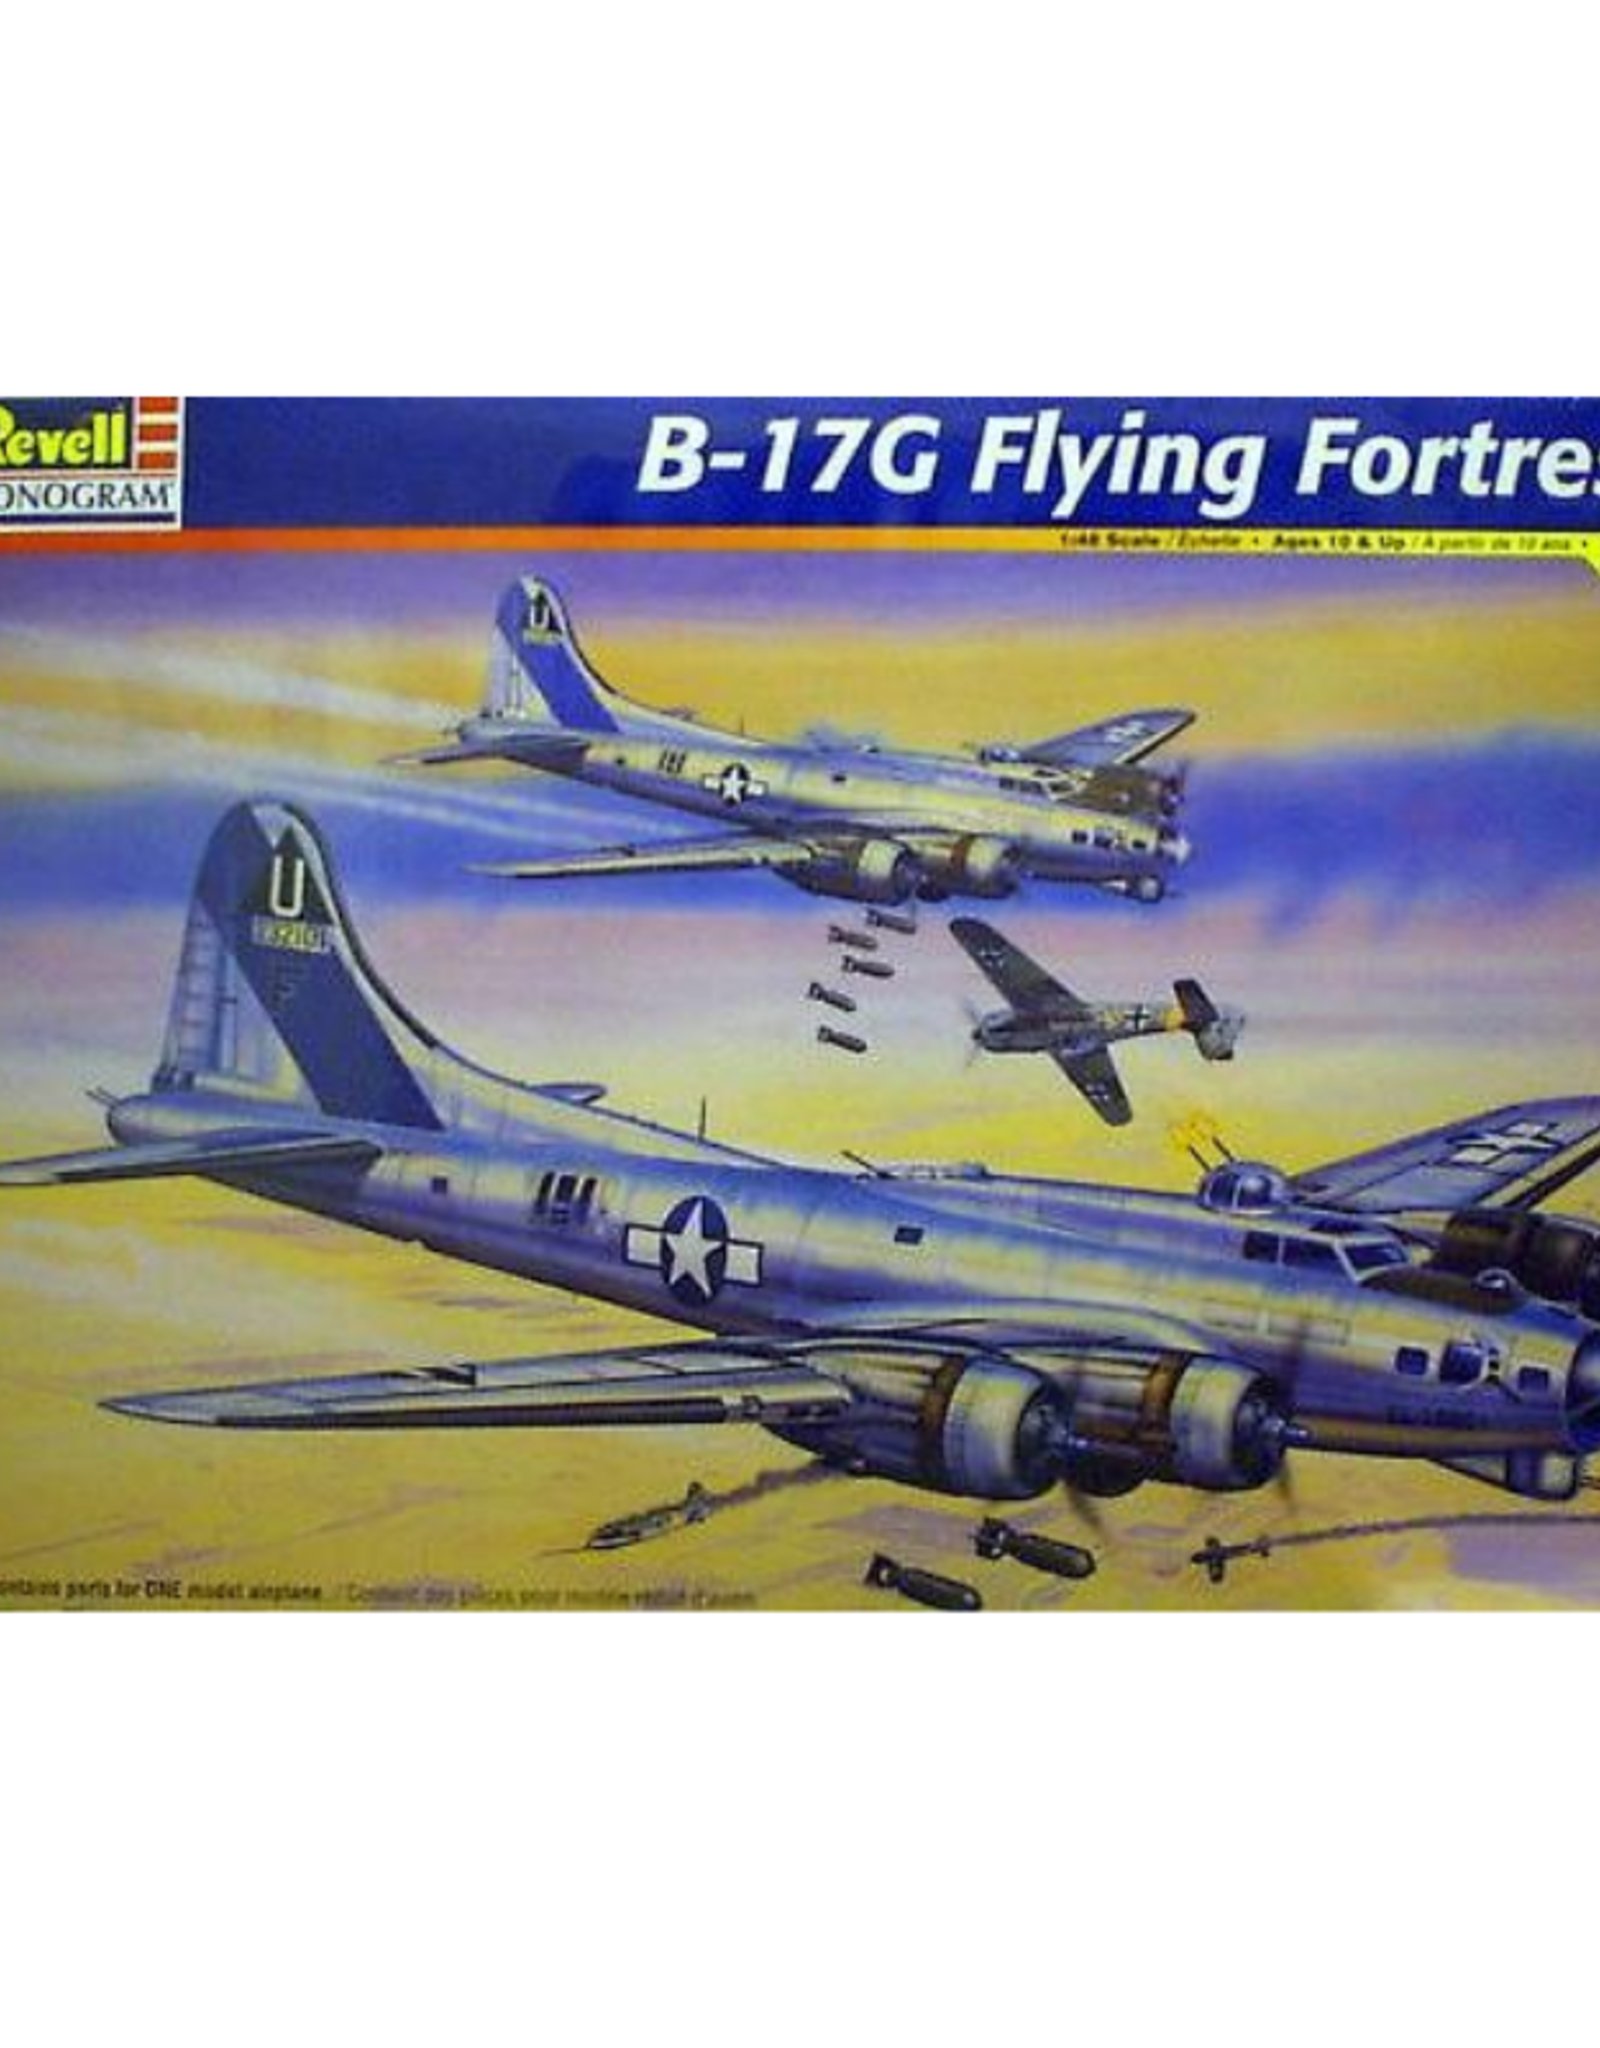 Revell B-17G Flying Fortress (1:48th scale)